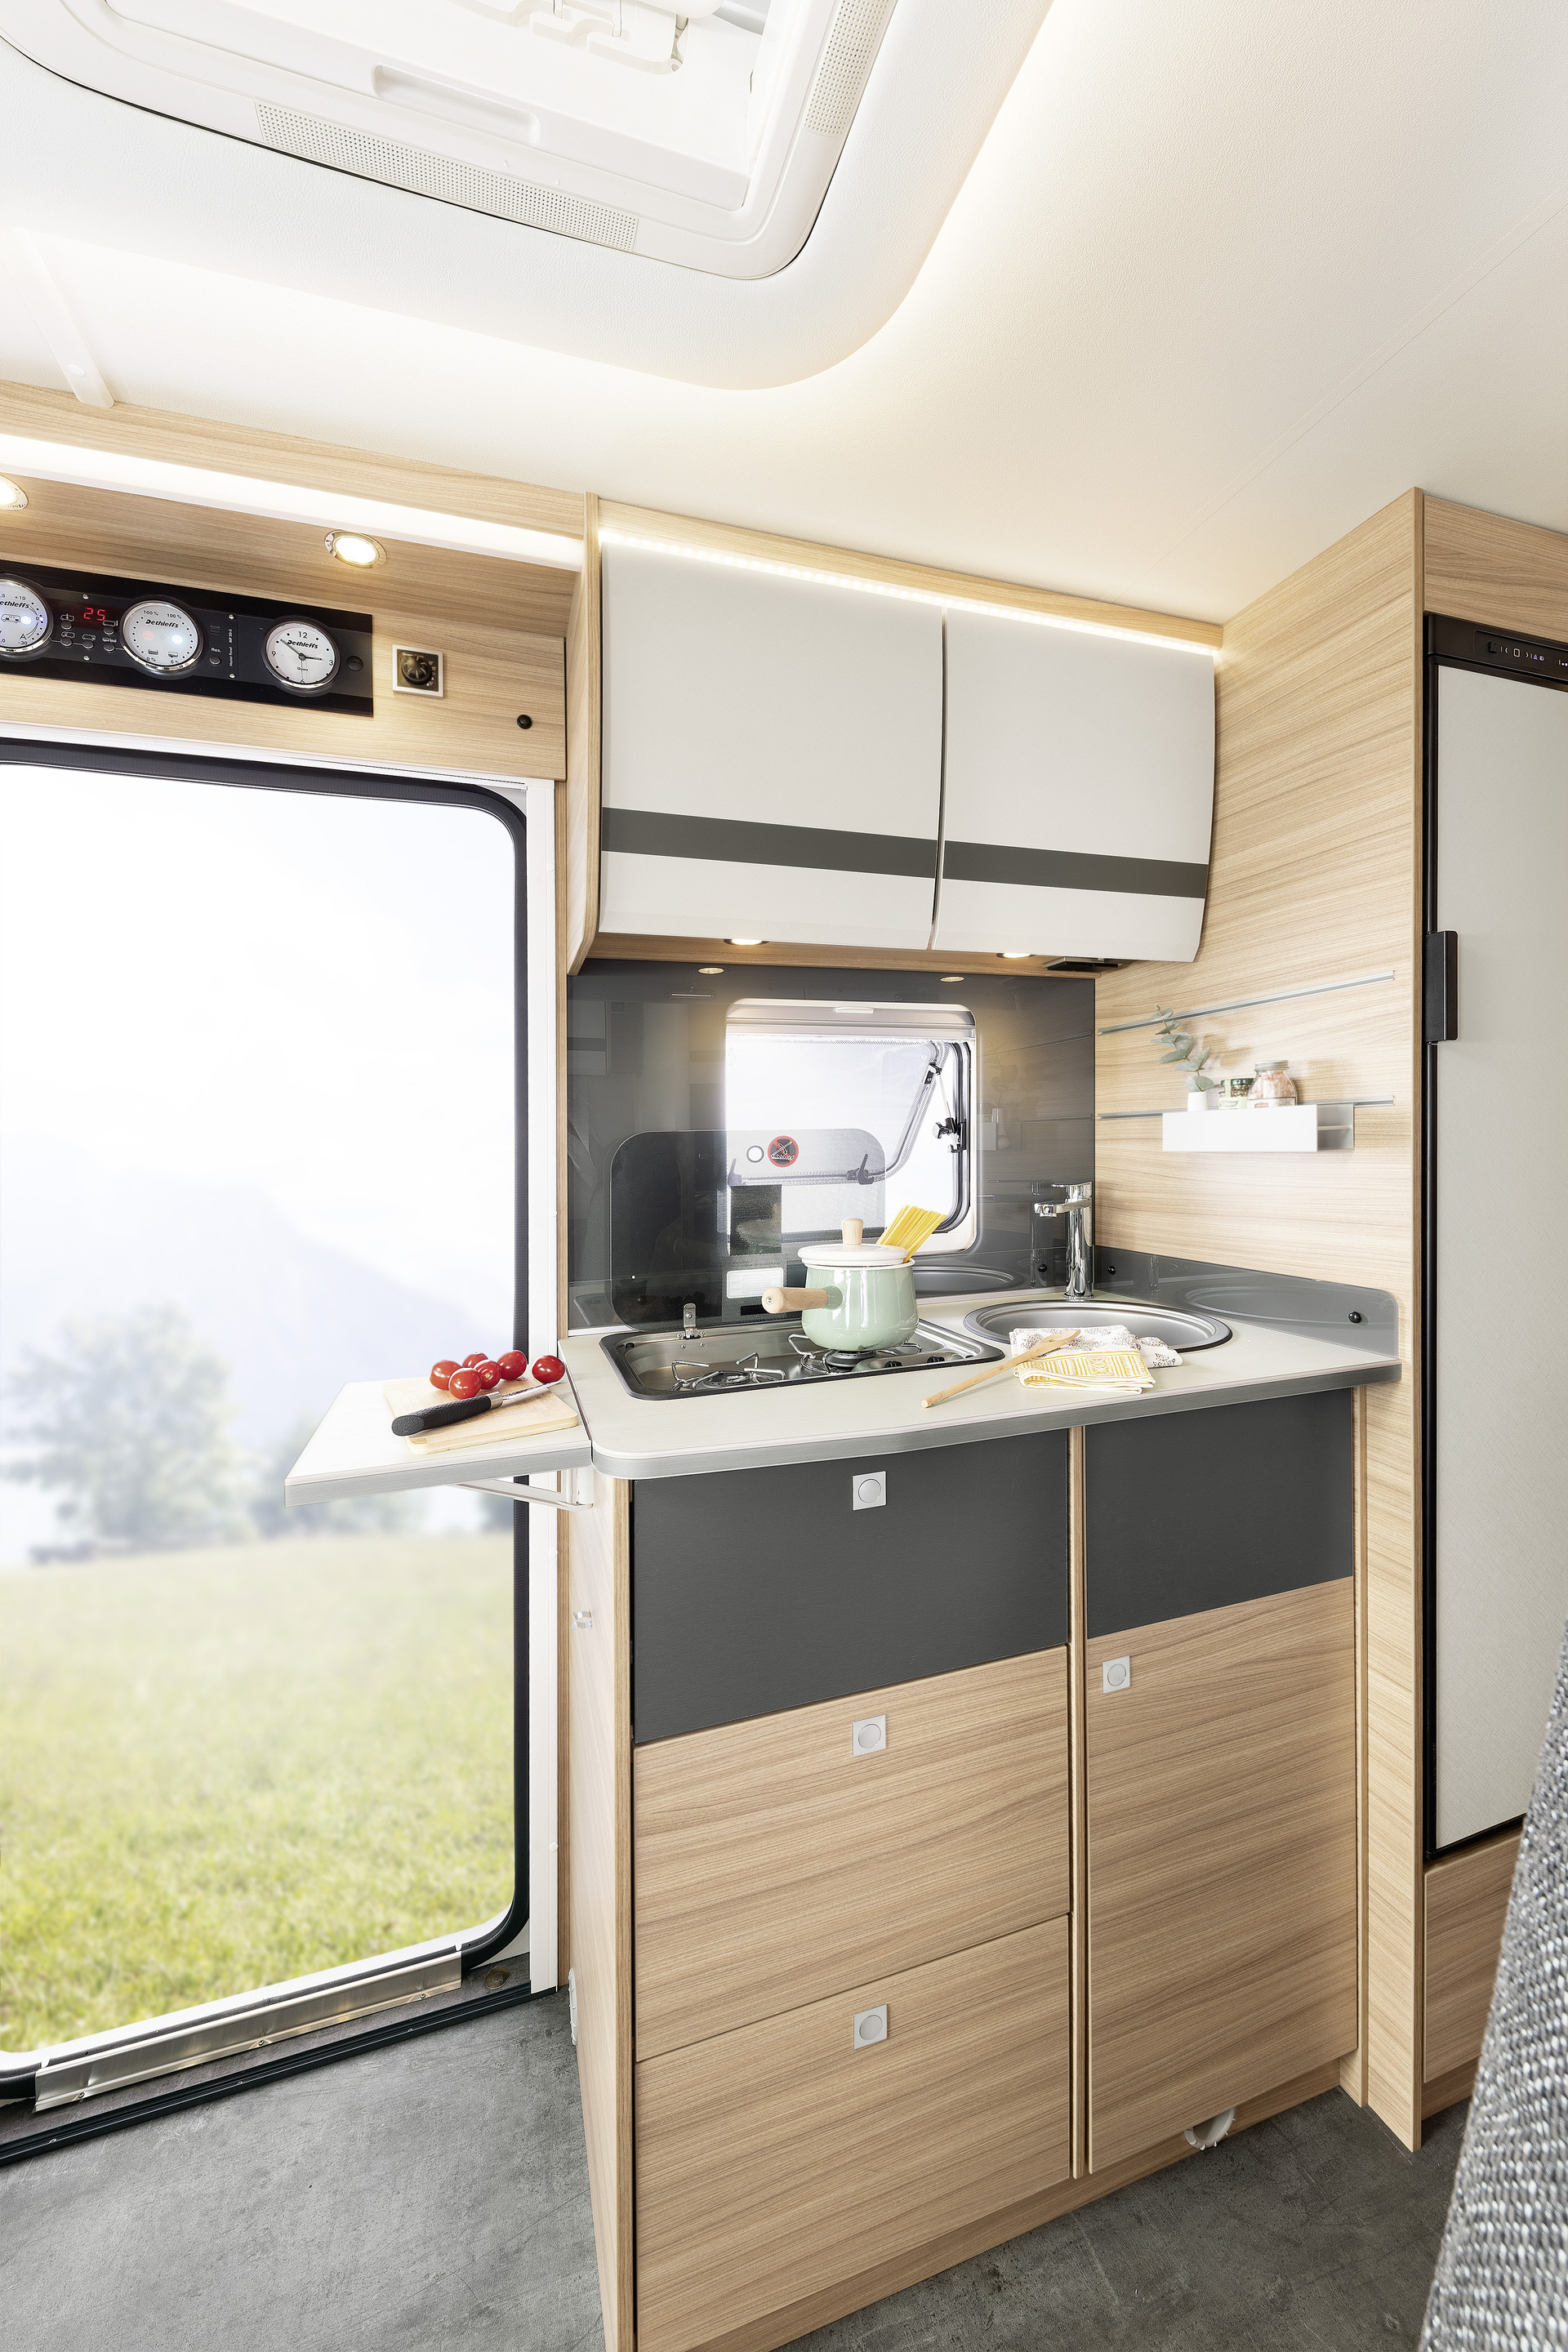 Compact, yet packed everything you need – fully equipped kitchen with hot-water system, gas cooker, large drawers and fridge • T/I 6